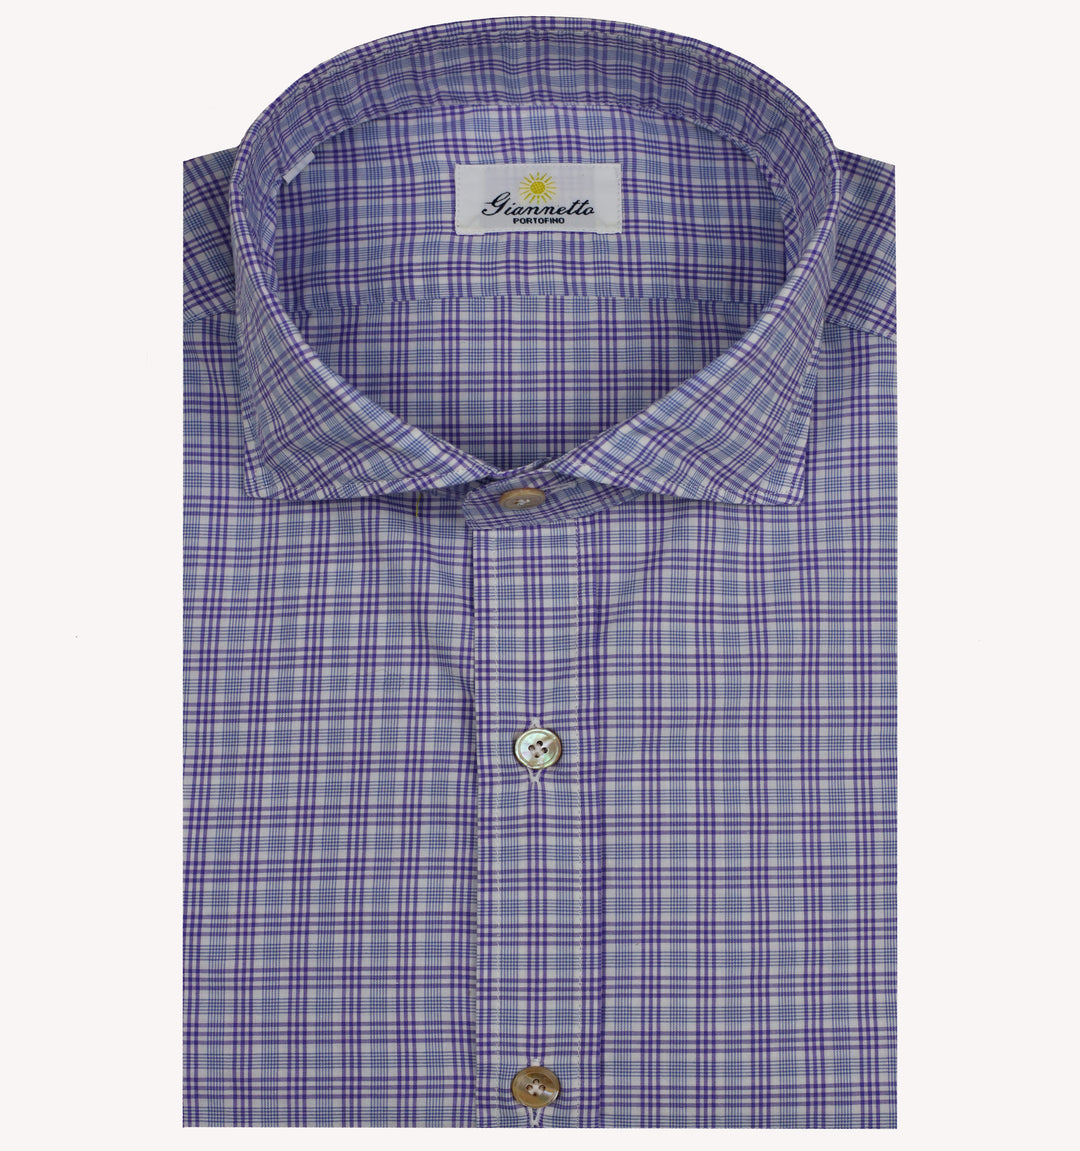 Giannetto Check Sport Shirt in Purple Blue